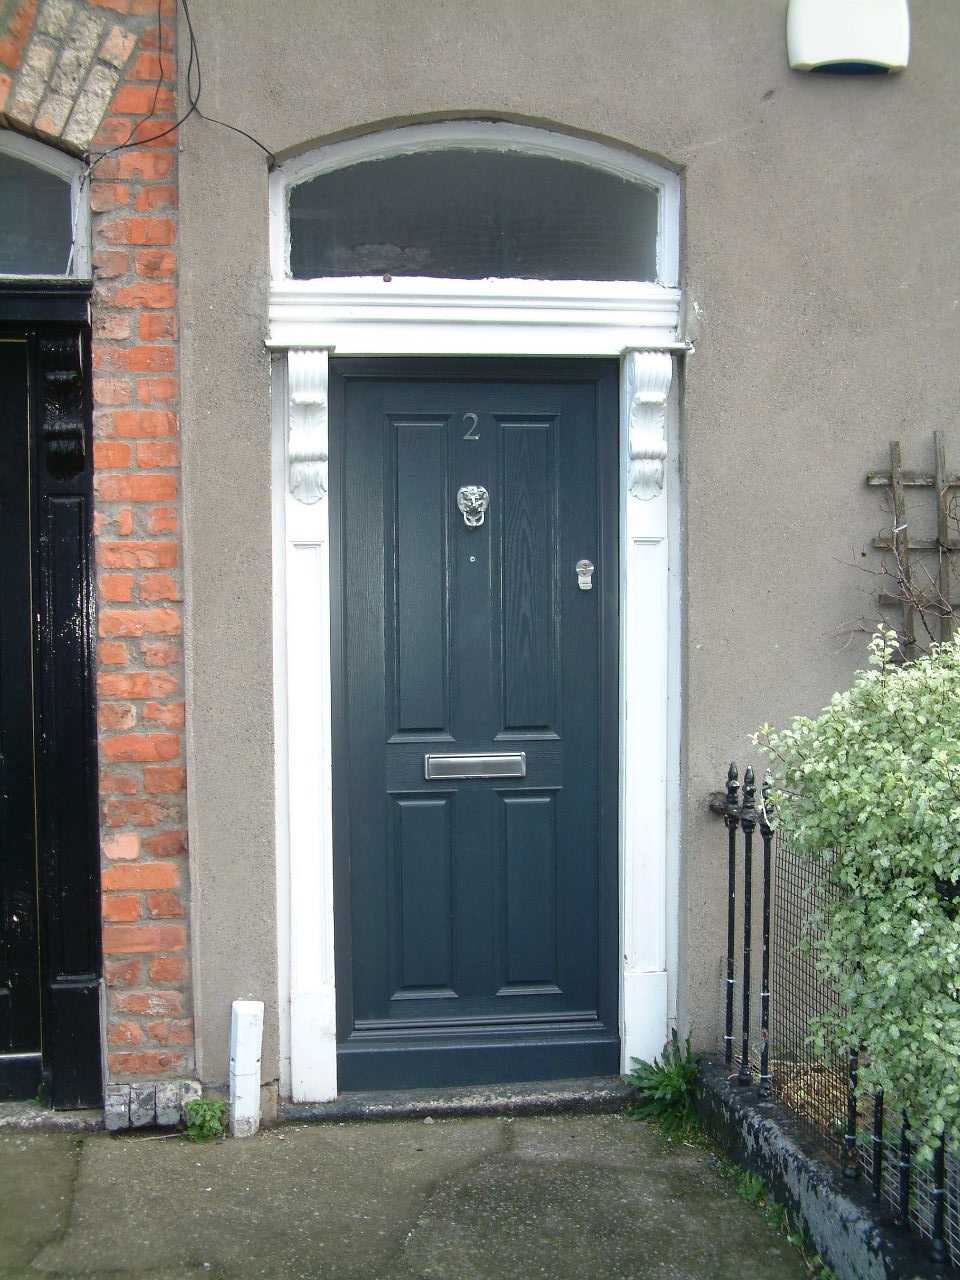 ANTHRACITE GREY APEER APM1 COMPOSITE FRONT DOOR FITTED BY ASGARD WINDOWS DUBLIN.